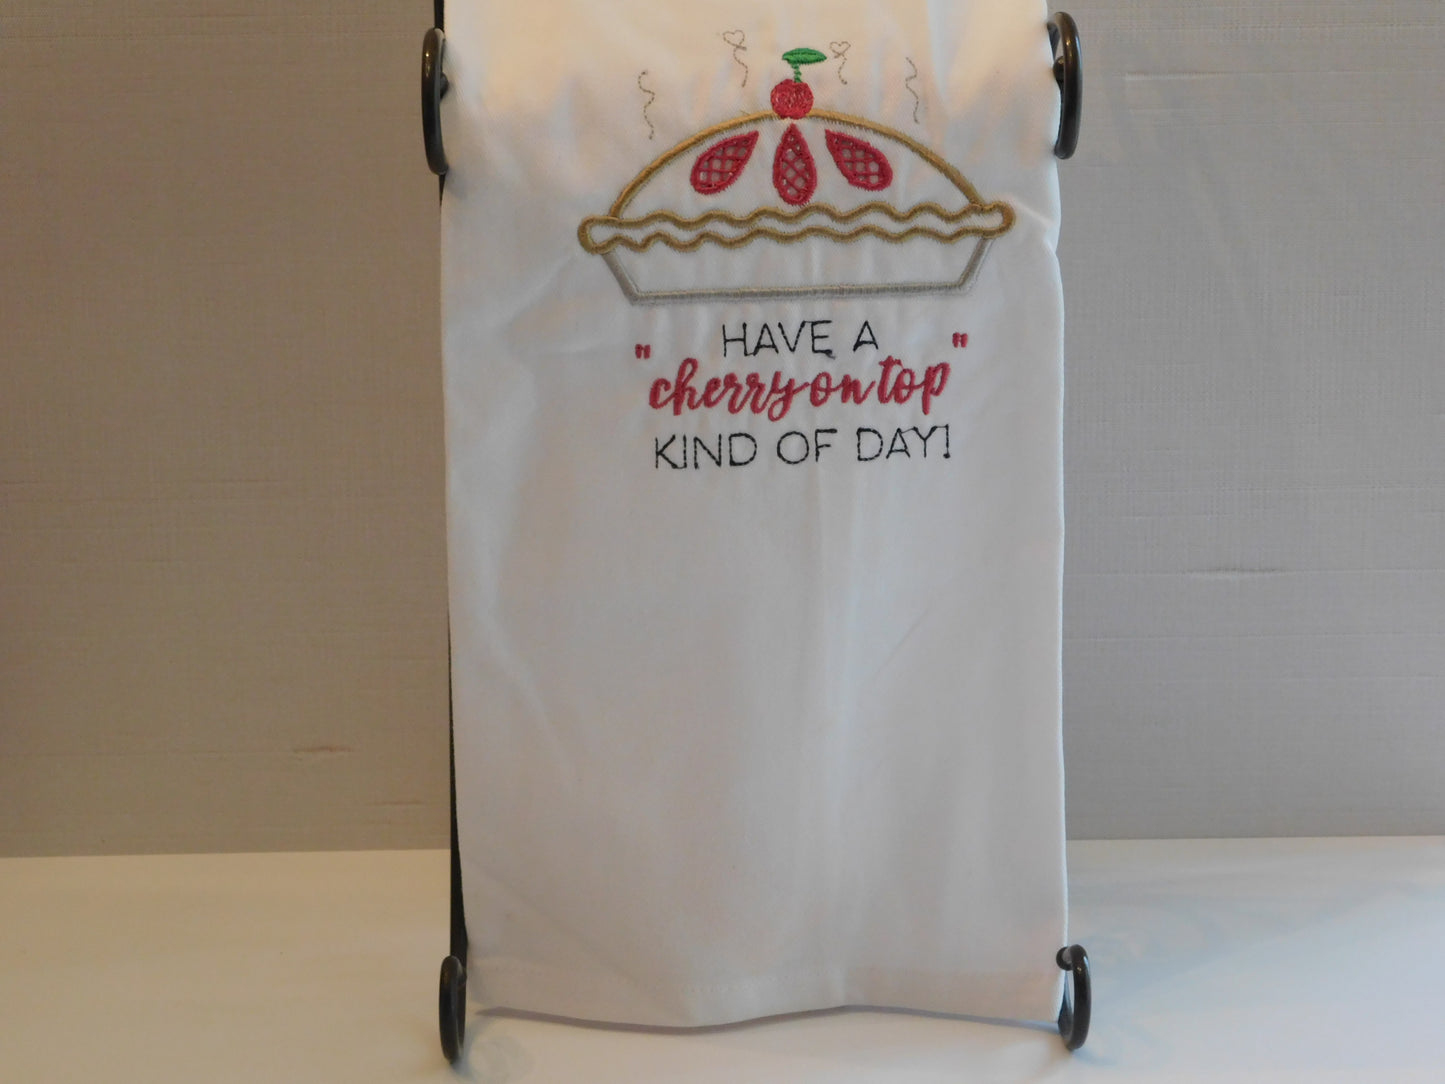 Embroidered Kitchen Towel with Apple Pie and Cherry on top